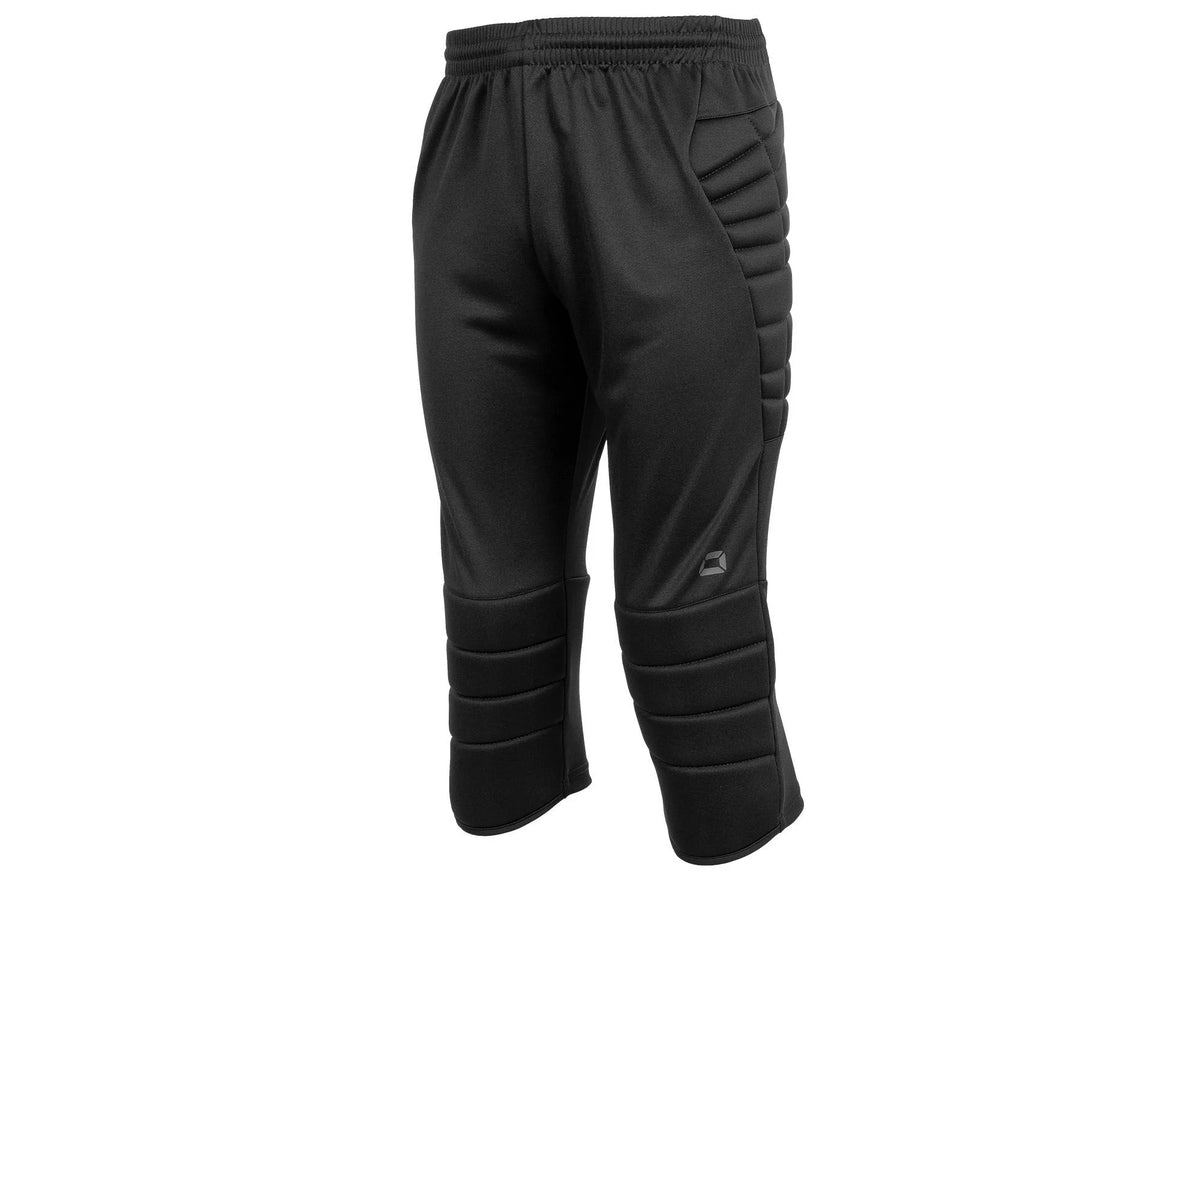 Brecon 3/4 Goalkeeper Pants in Adult